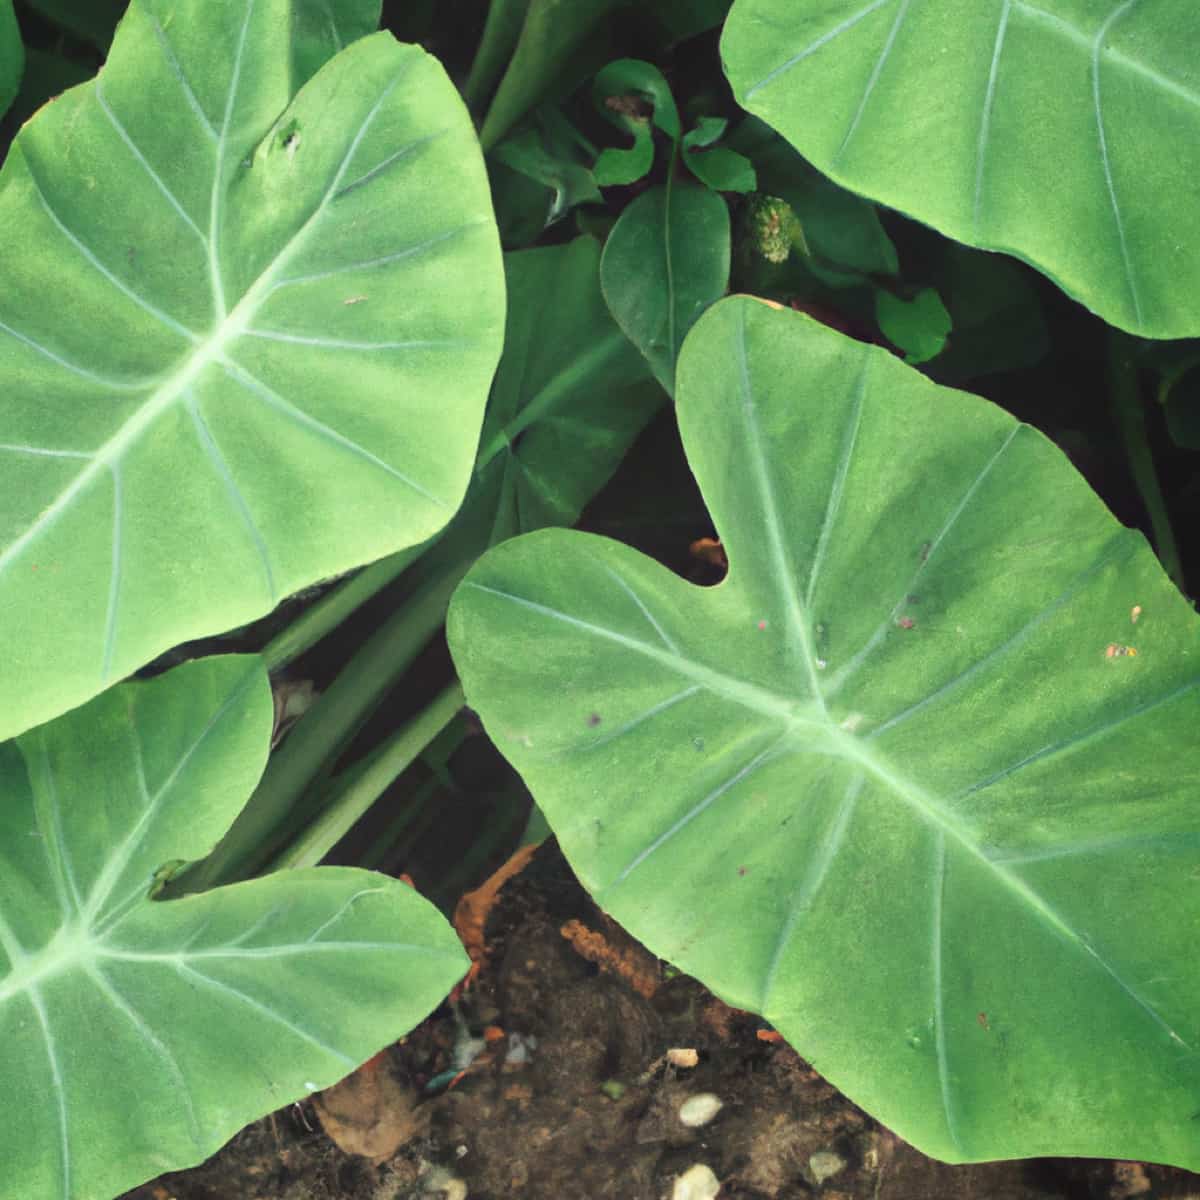 Common Problems with Taro Root Plants